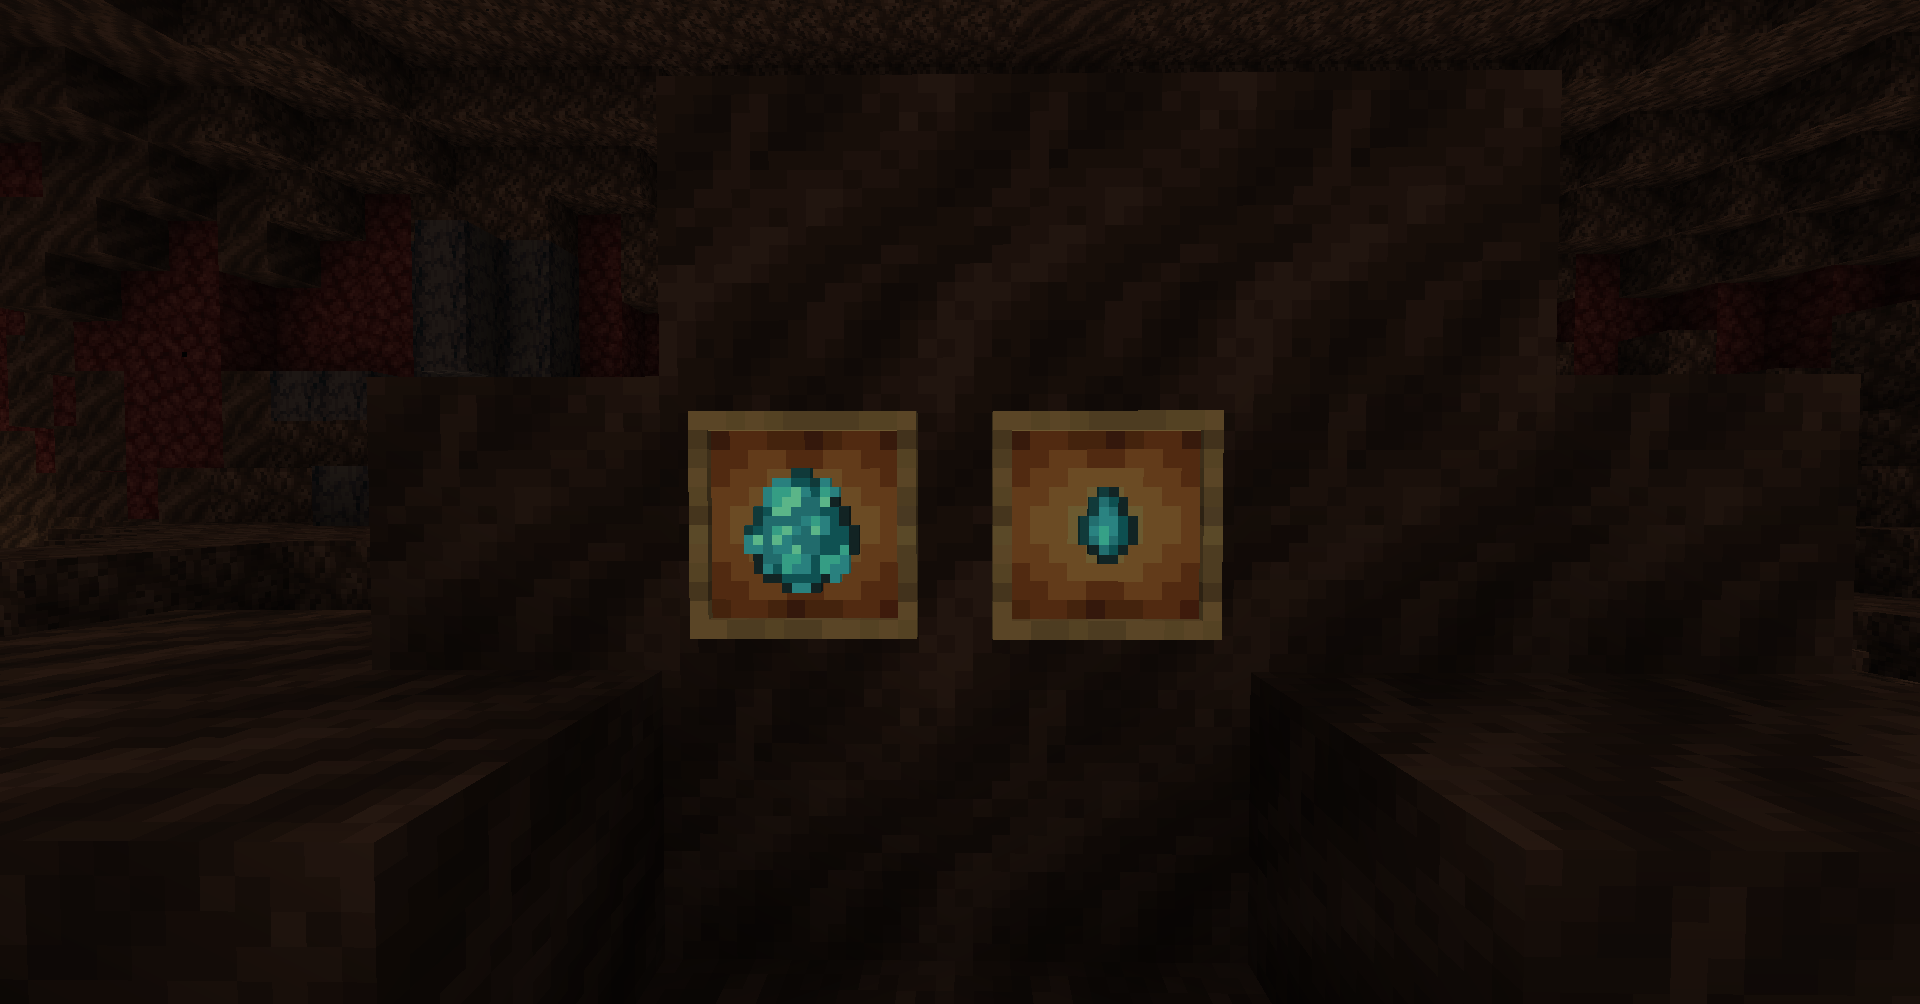 How the Glow Sqast Spawn Egg and Tear look in-game